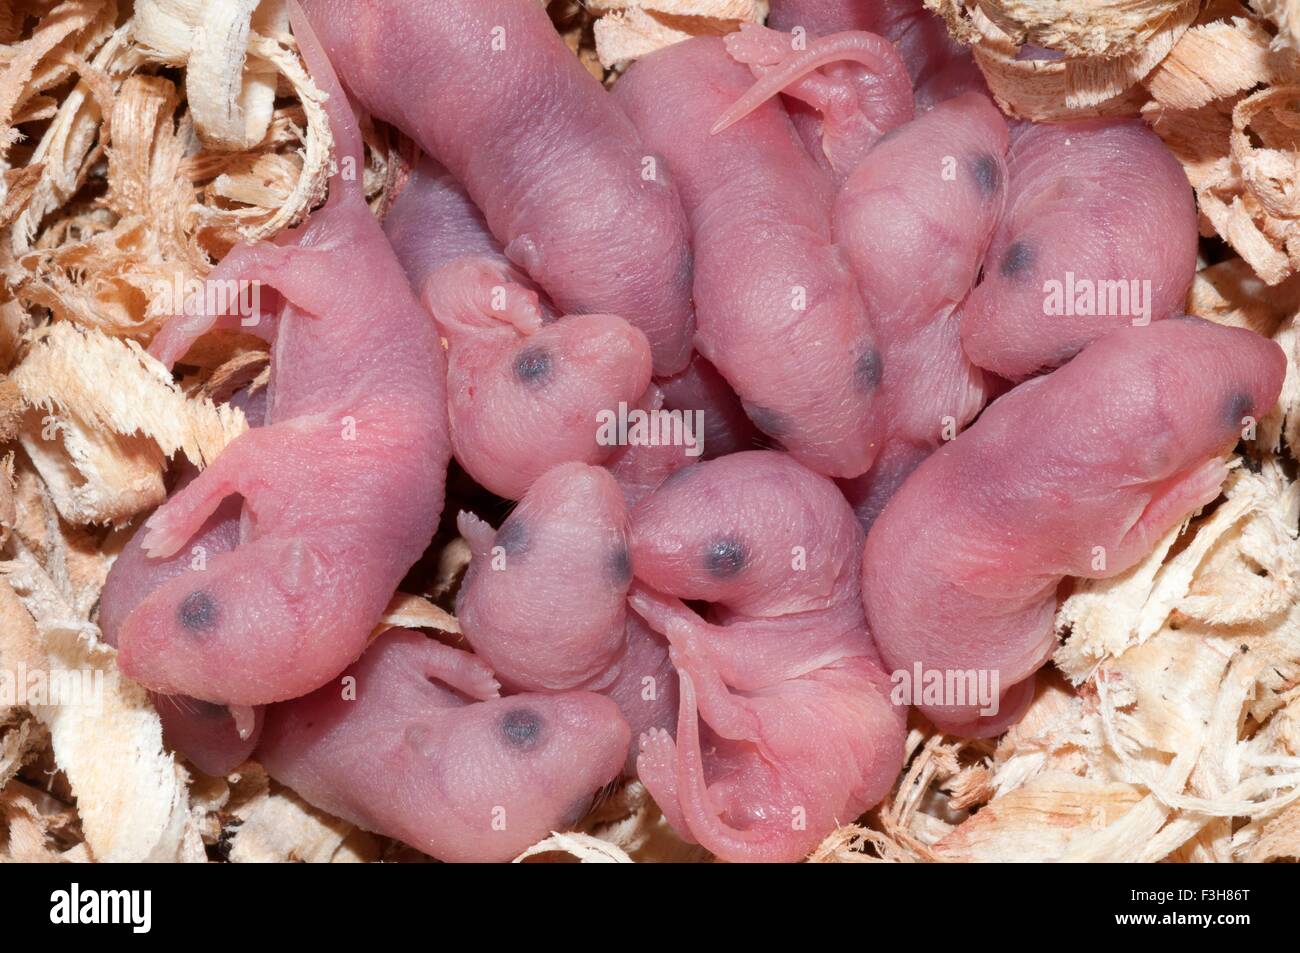 Newborn baby white mice in a nest made of wood shavings Stock Photo